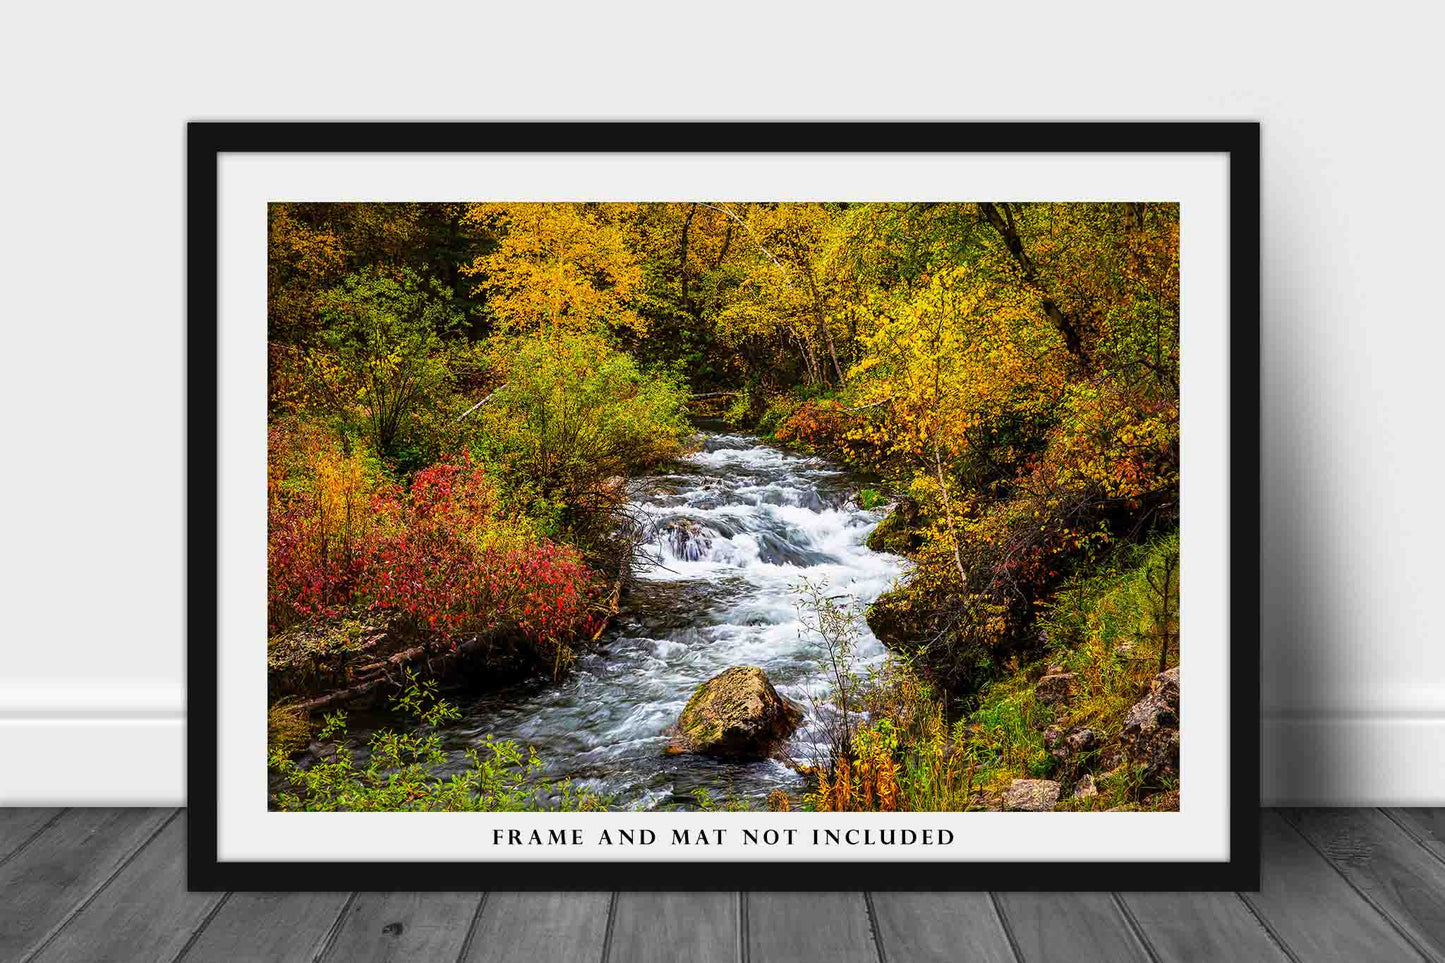 Spearfish Canyon Photography Print | Creek in Fall Color Picture | South Dakota Wall Art | Black Hills Photo | Nature Decor | Not Framed